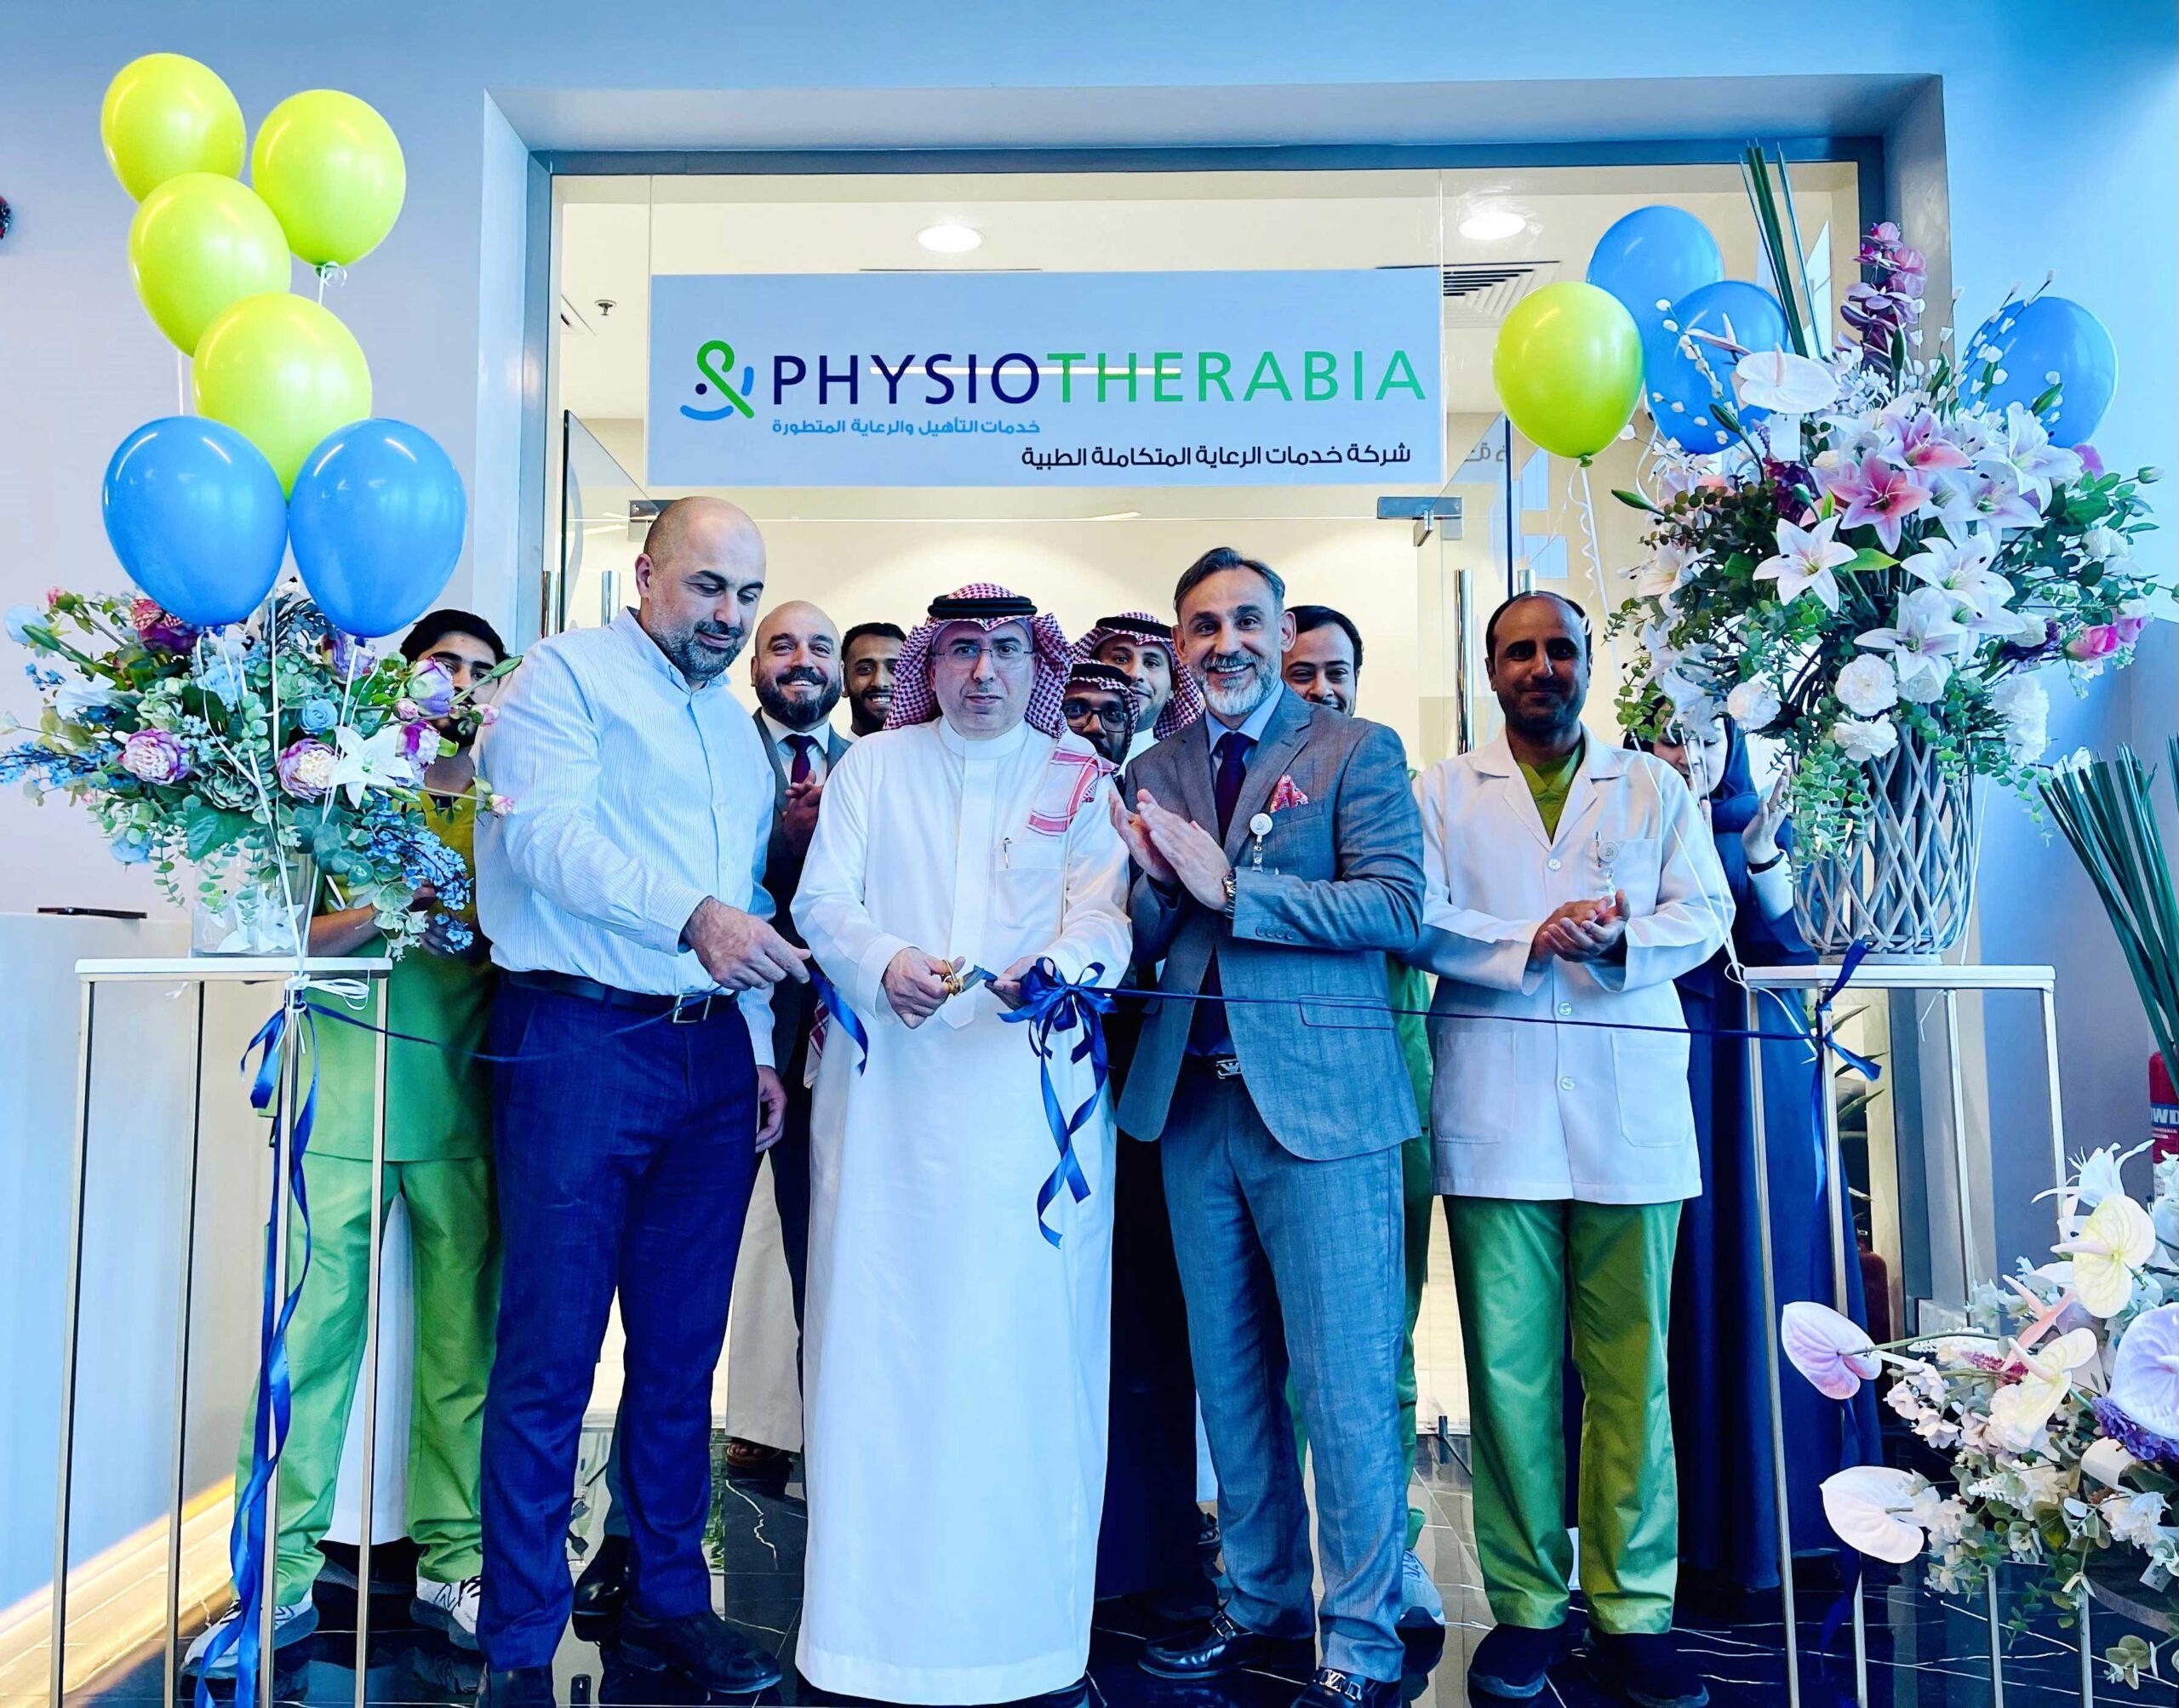 Burjeel Holdings Expands PhysioTherabia Network with Eight New Centers in Saudi Arabia